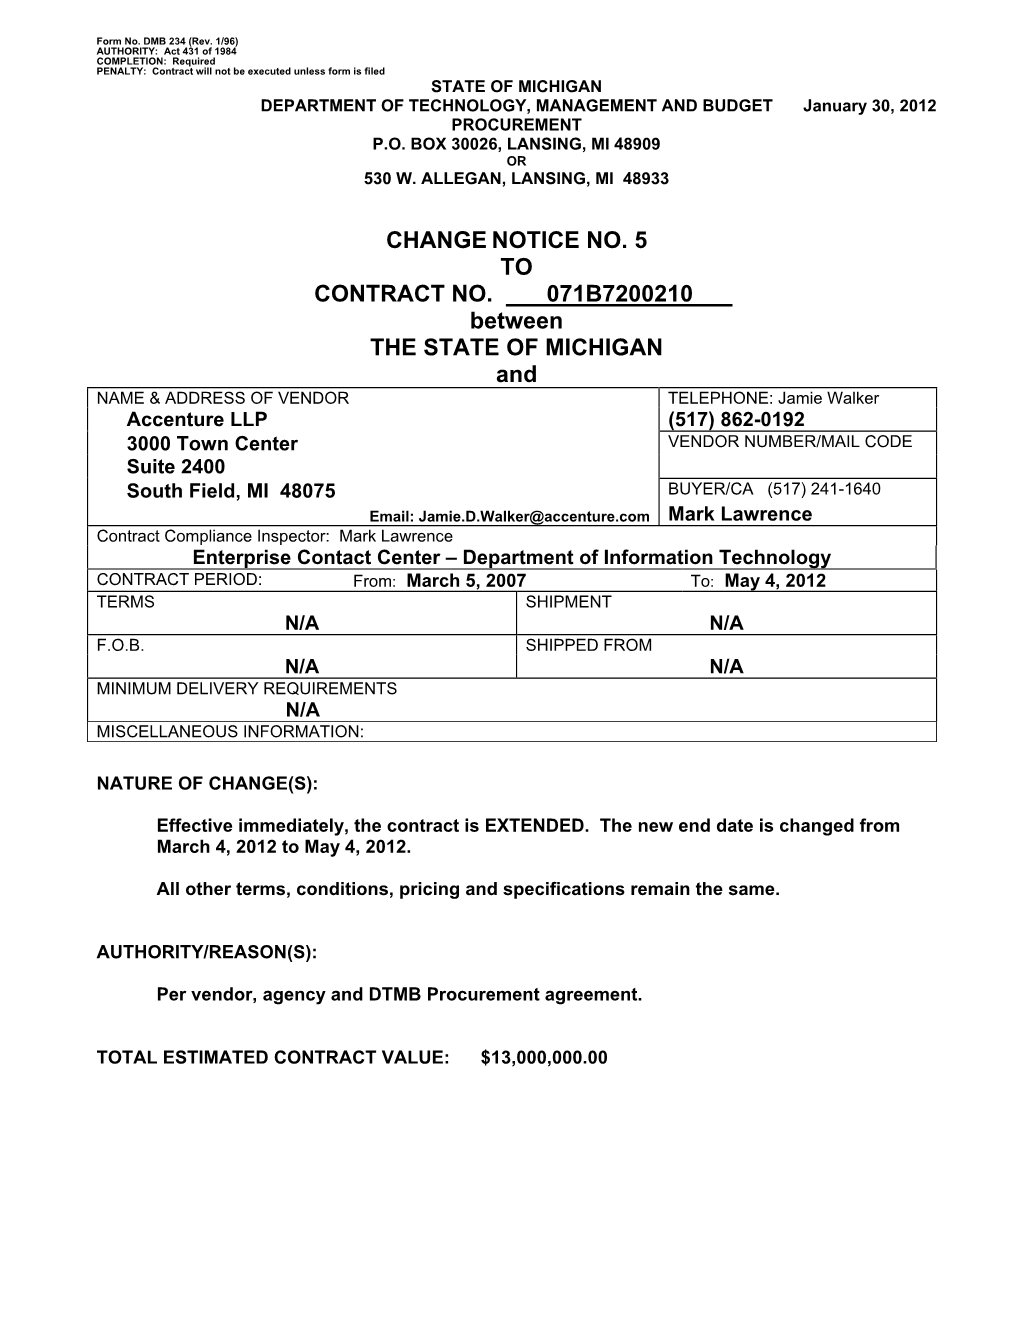 CHANGE NOTICE NO. 5 to CONTRACT NO. 071B7200210 Between the STATE of MICHIGAN